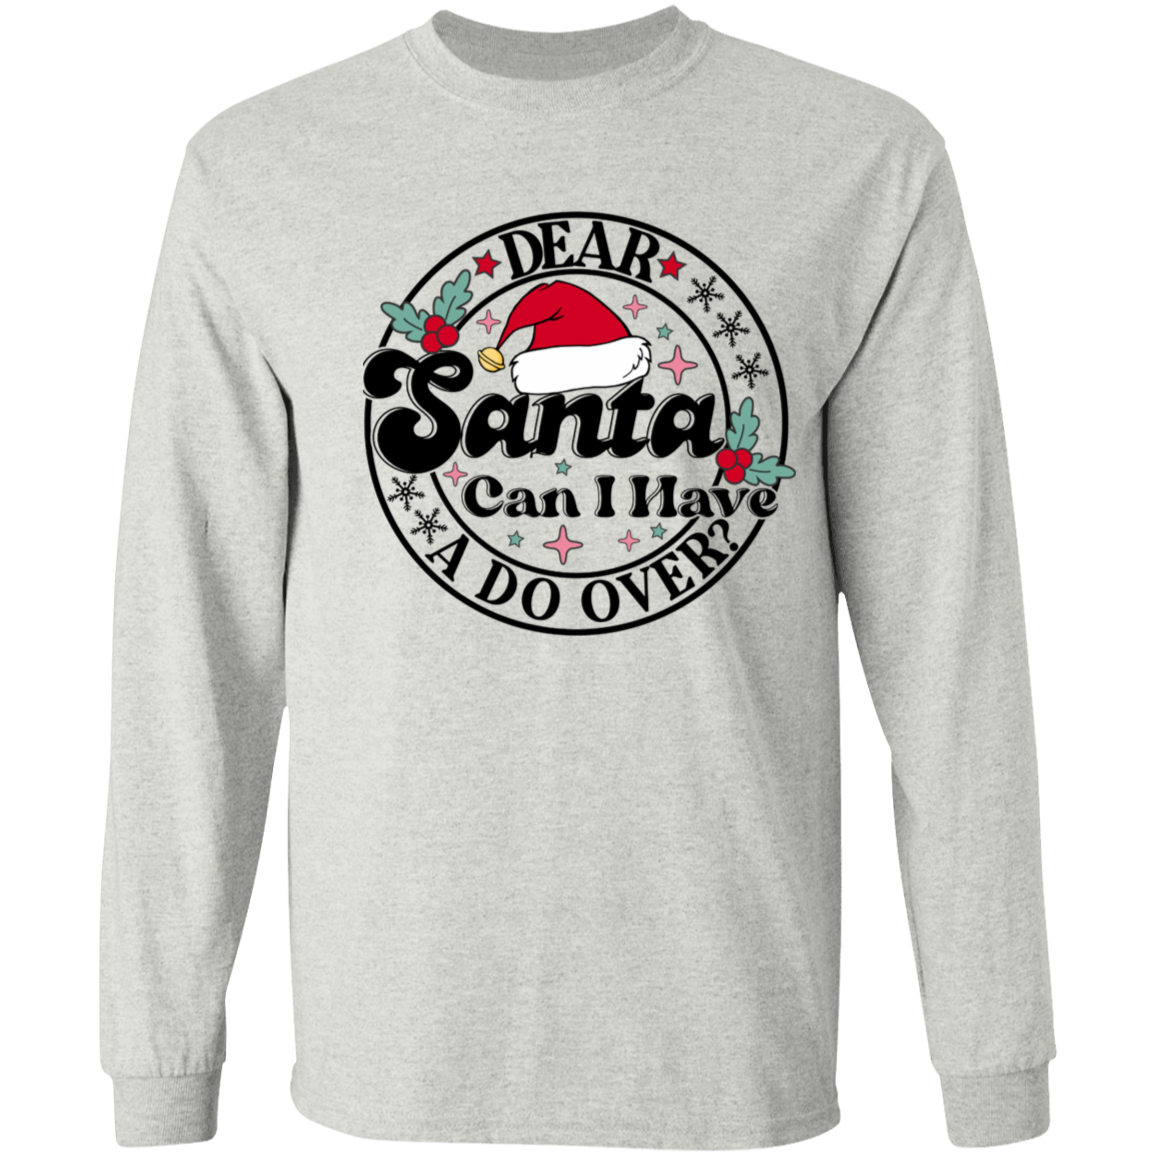 Santa, Can I Have a Do Over? Funny Santa Hat Christmas Sweatshirt, Humorous Christmas Gift, Unique Holiday Sweater,